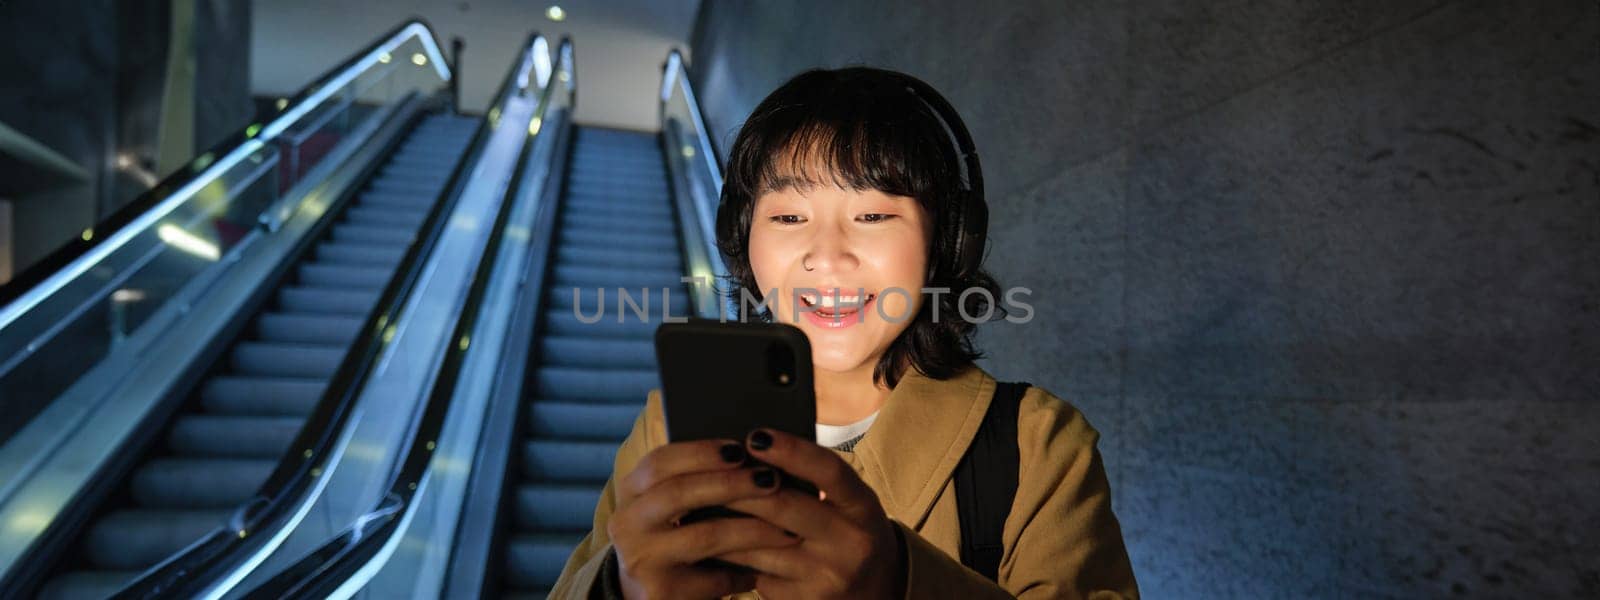 Stylish young girl, student in headphones, listening music on her smartphone, reading news on phone while going down on escalator.